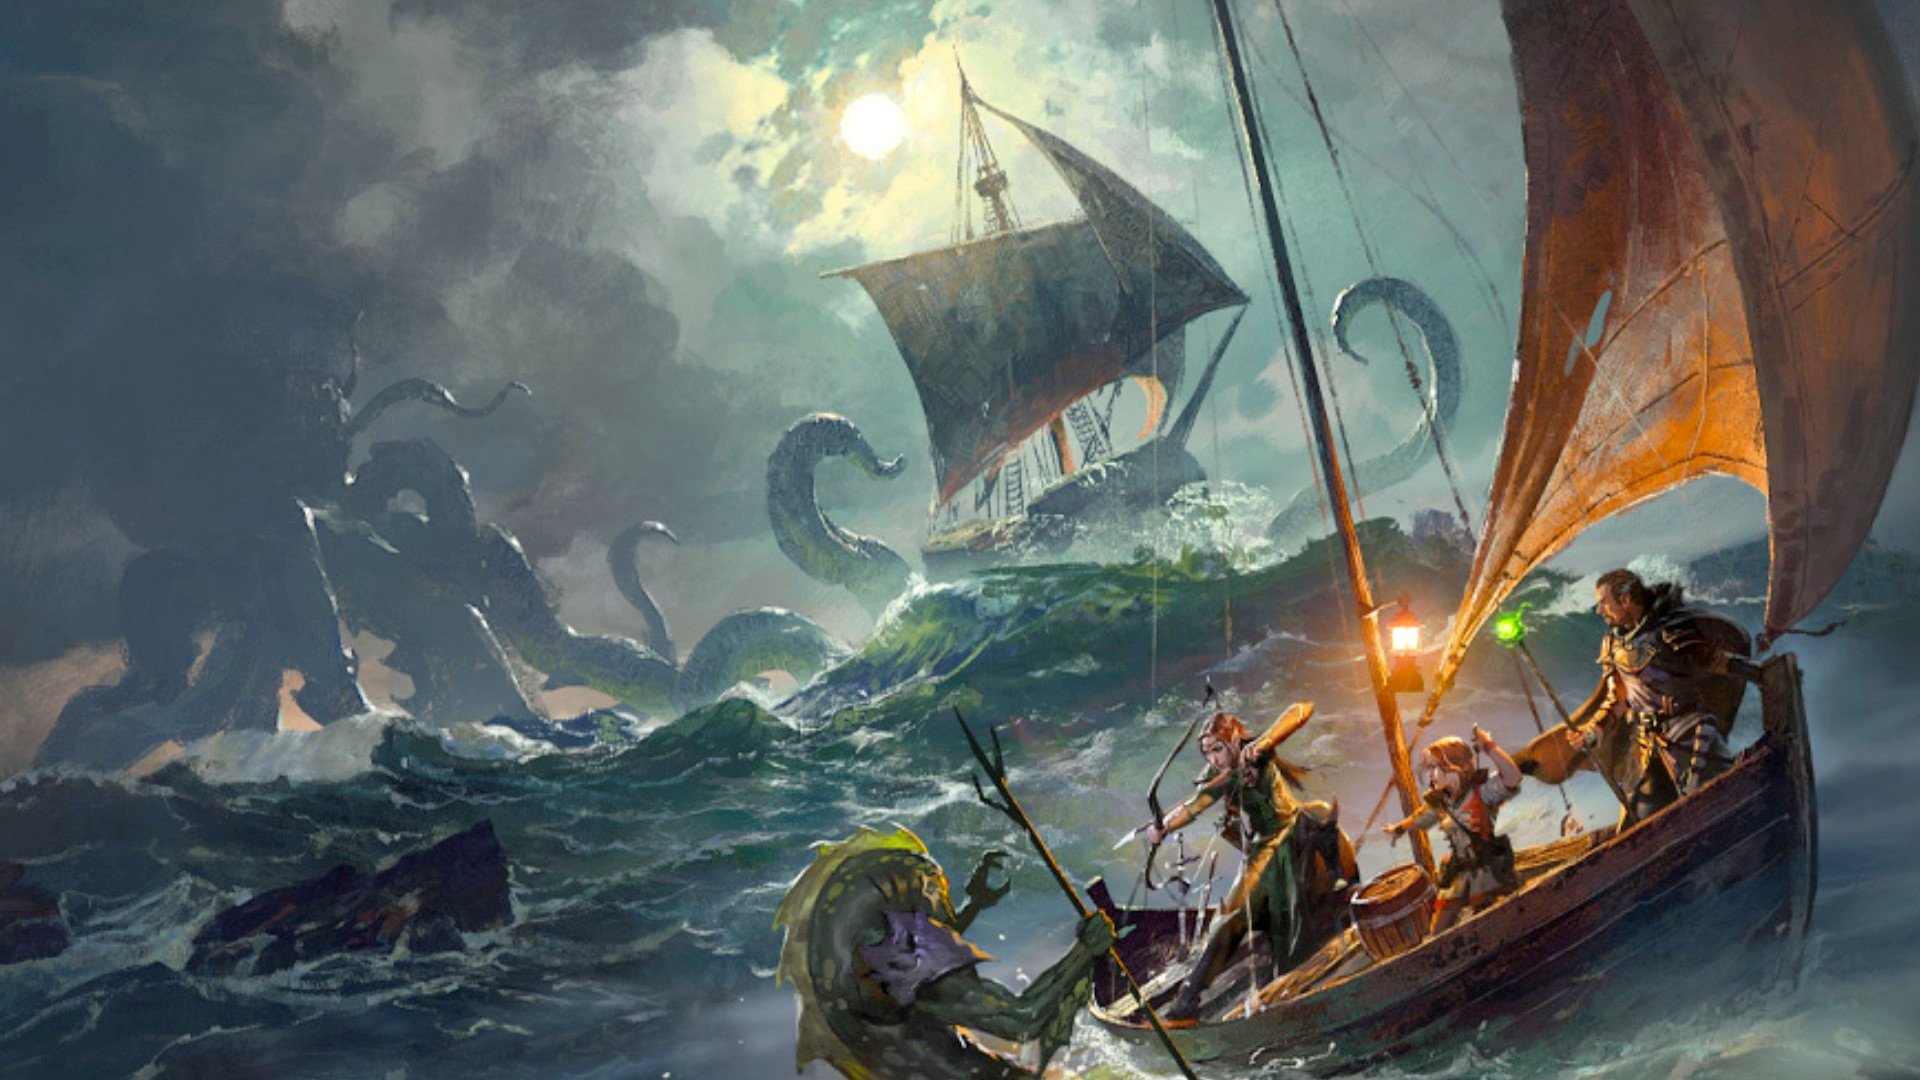 DnD one shots guide - Wizards of the Coast artwork from Ghosts of Saltmarsh showing a ship rocked by a storm, with adventurers battling a sea monster